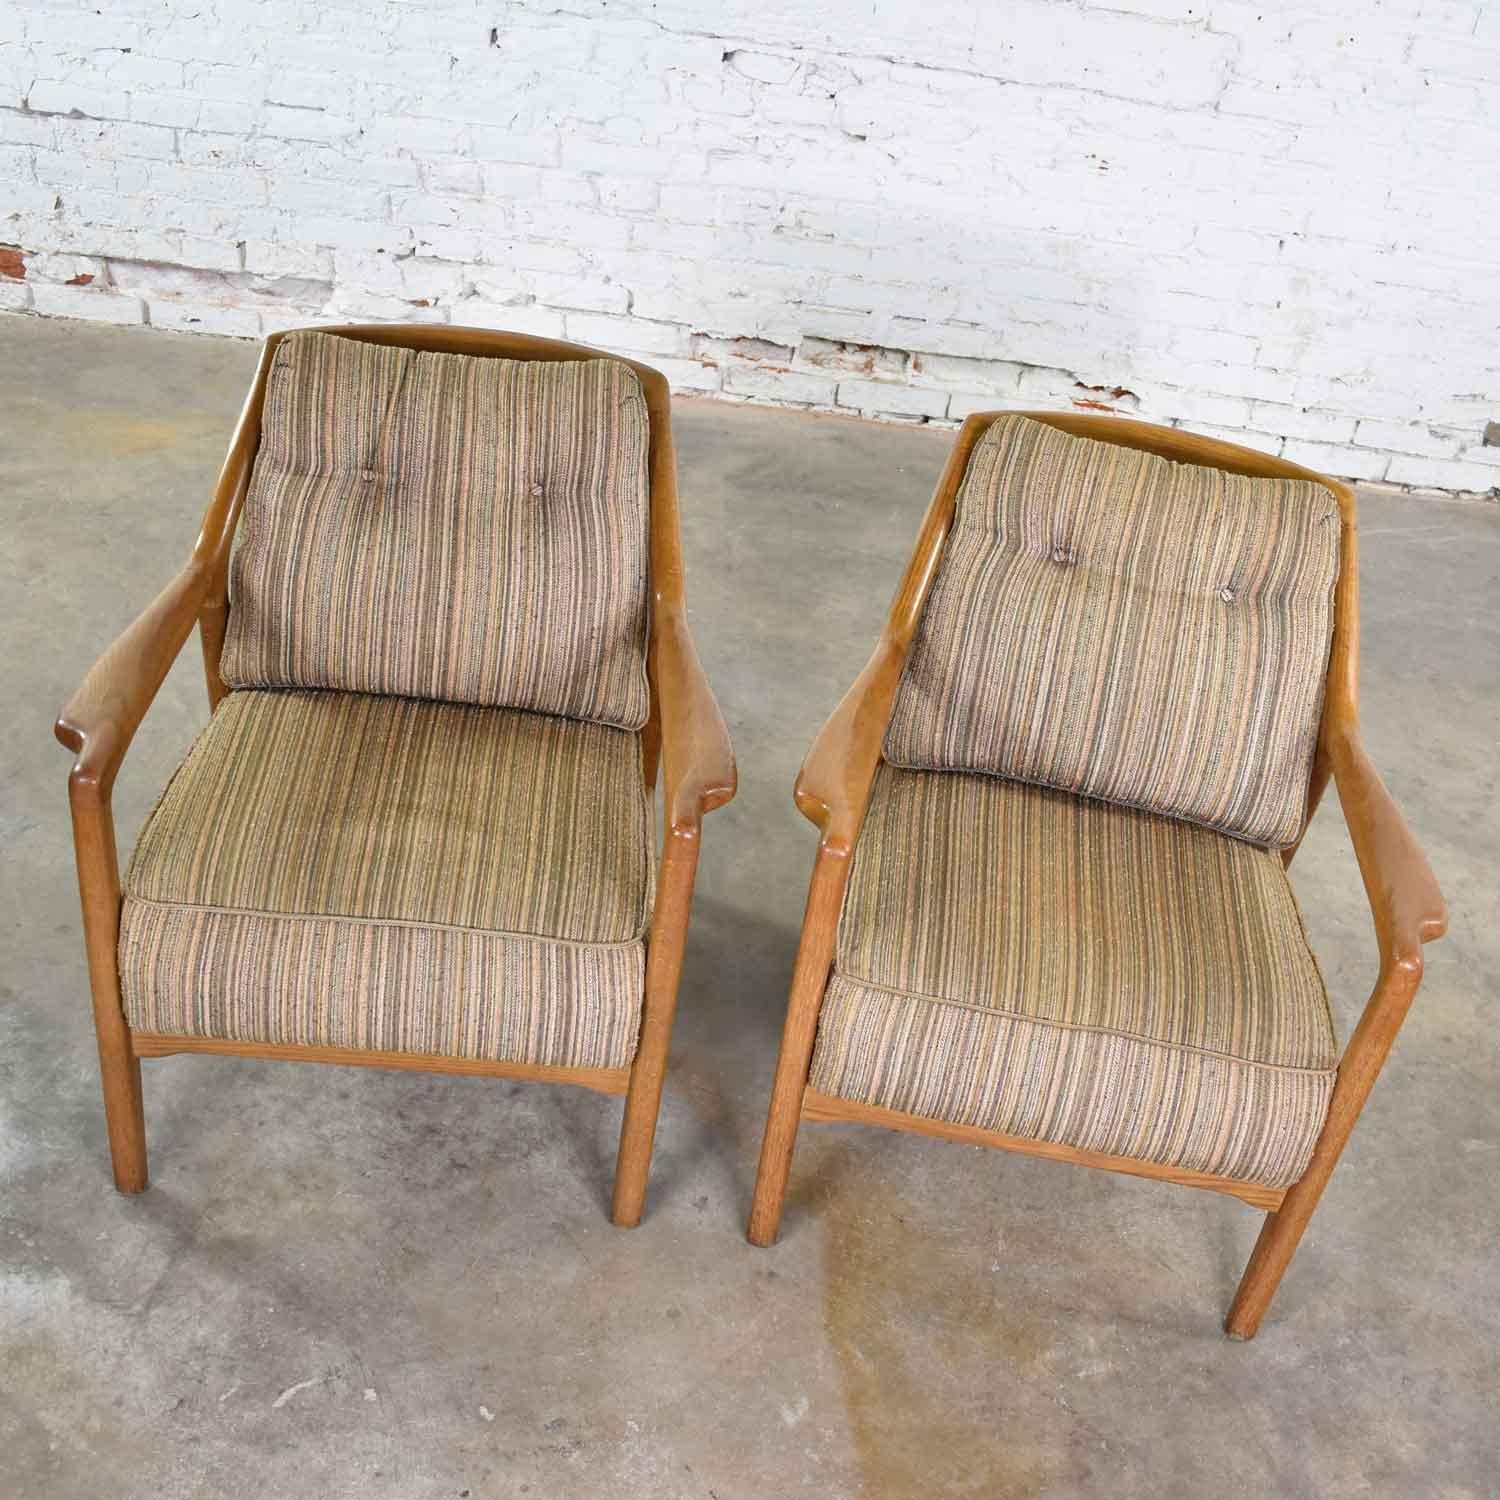 20th Century Pair of Ash Group Spindle Back Chairs by Jack Van der Molen for Jamestown Lounge